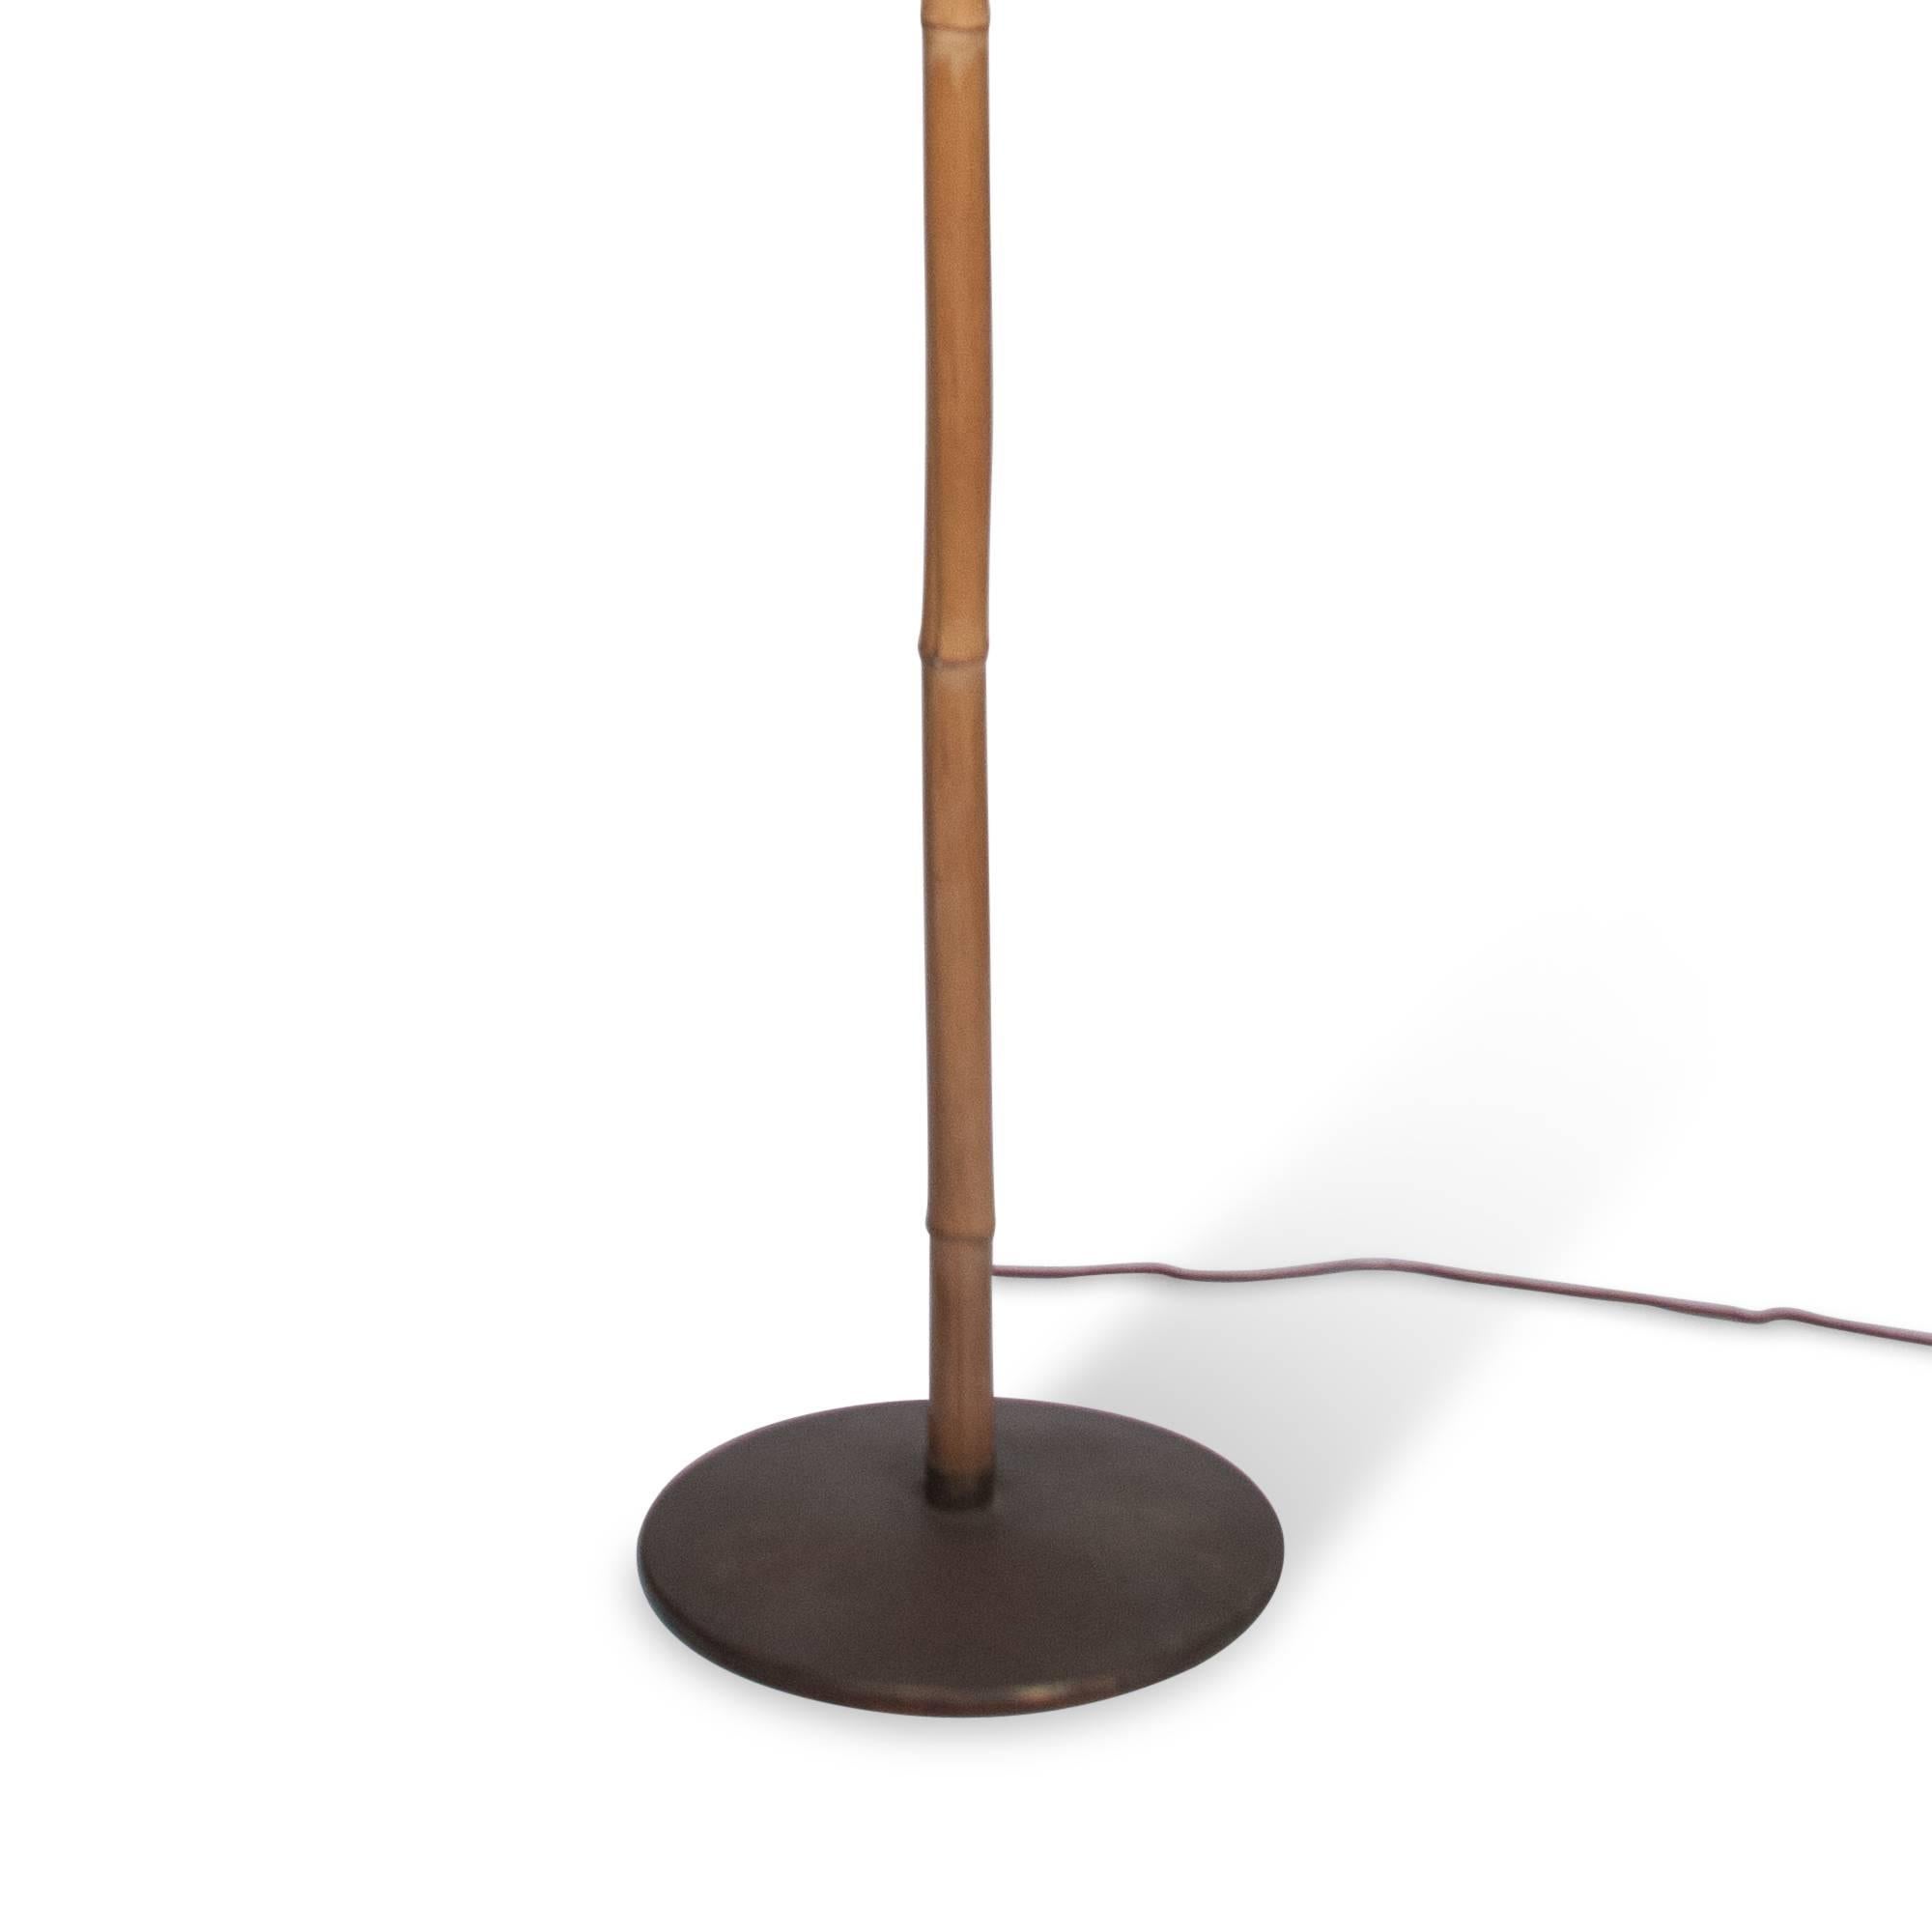 Bamboo floor lamp on a bronze base with a conical burlap shade, in the style of Carl Auböck, Austria, 1950s. Base diameter is 12 1/4 inches. Overall height 70 in, shade diameter 25 1/2 in. 

Has two standard Edison-sized original sockets. Takes a